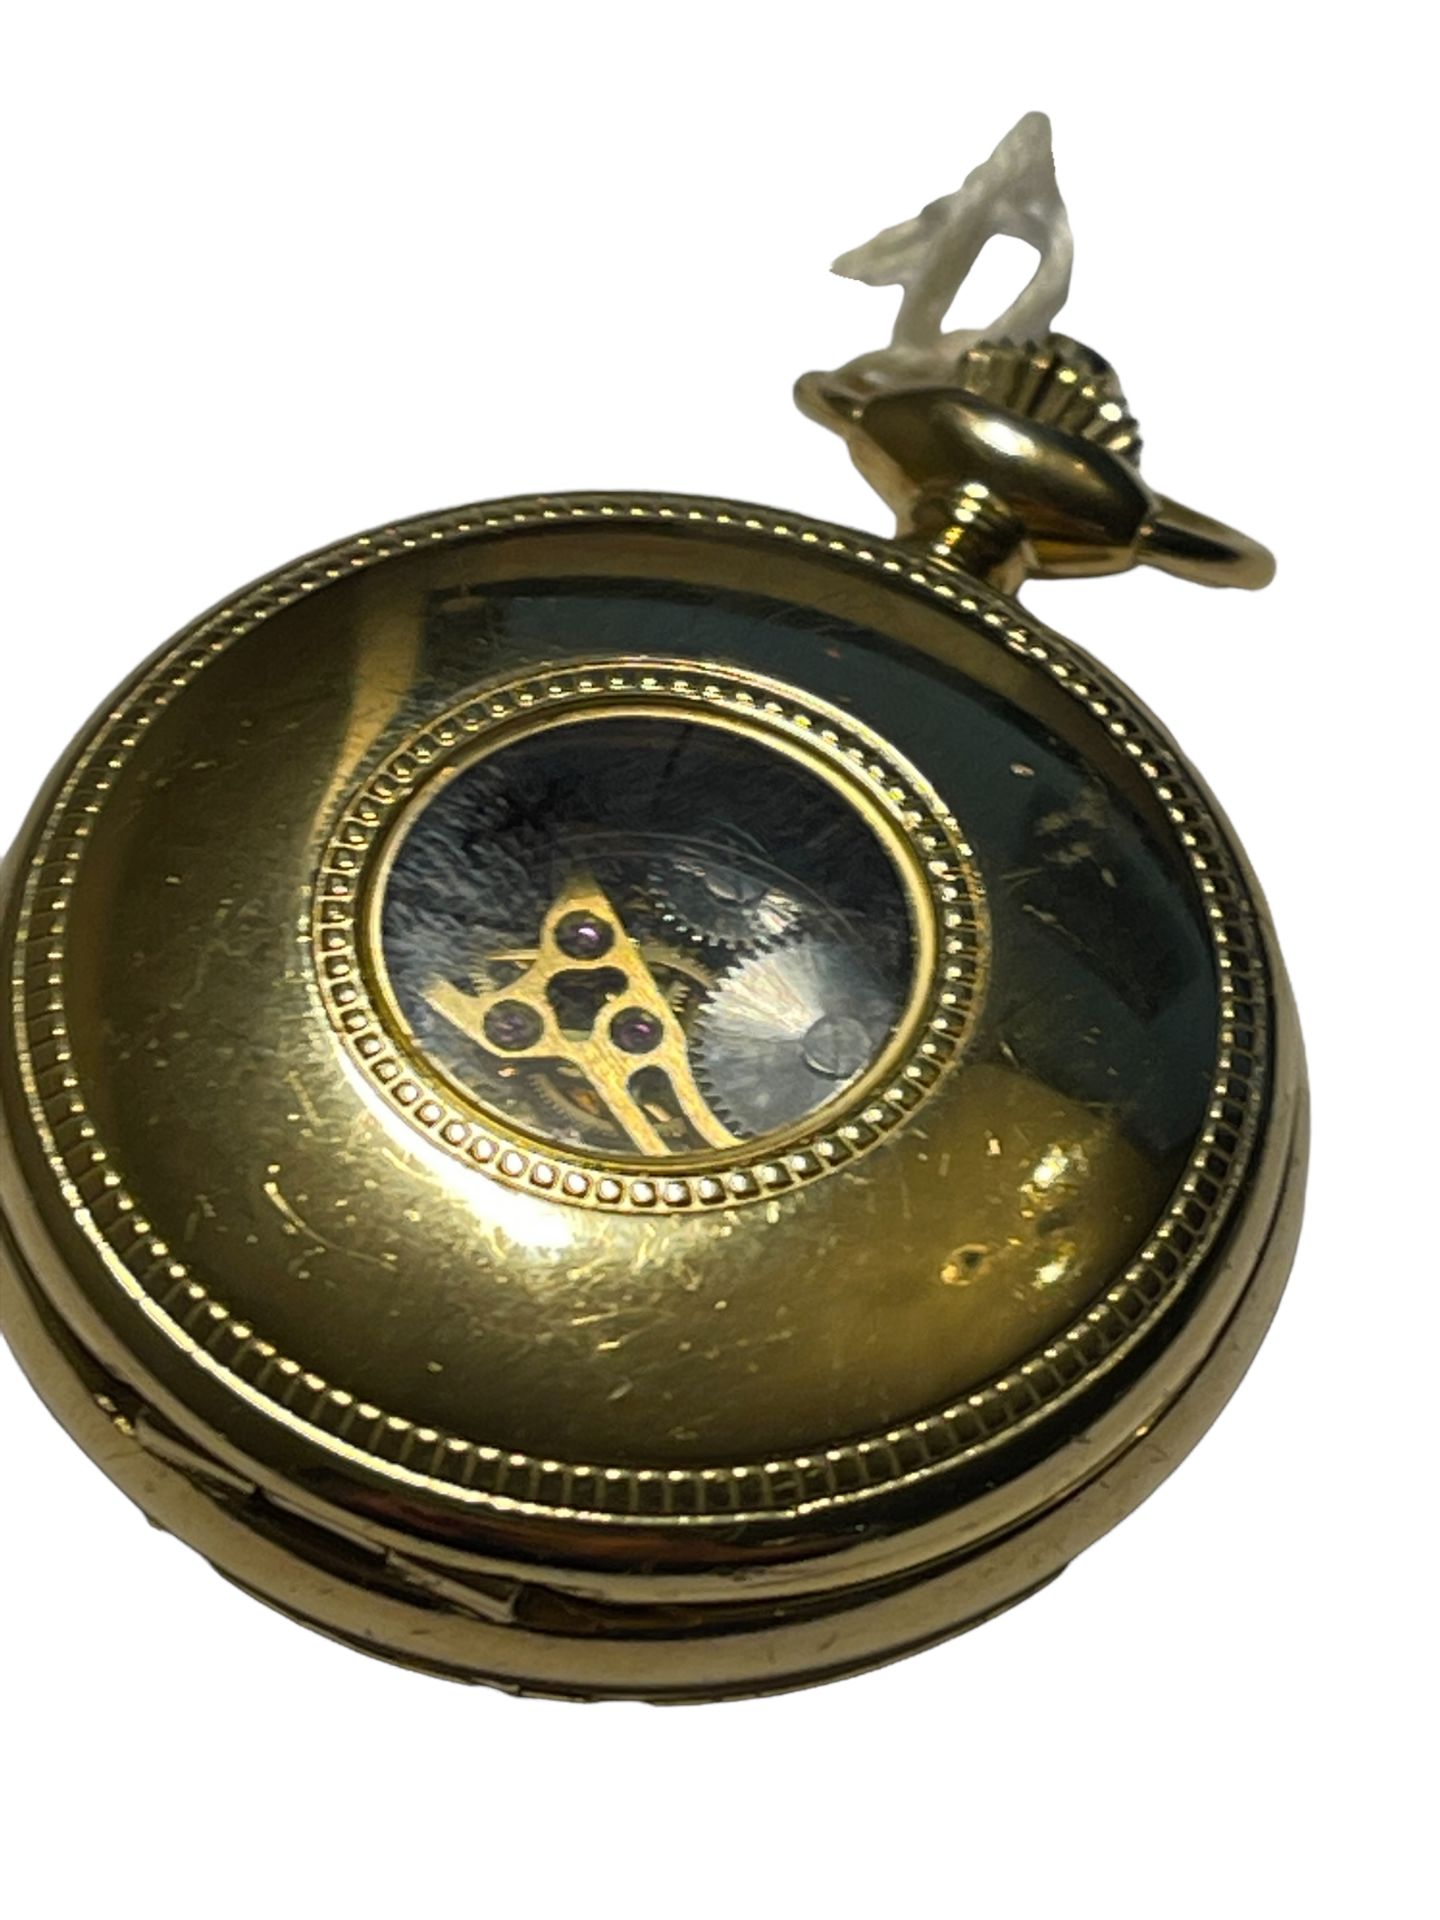 Gold Plated Mechanical Rotary Pocket Watch RRP £209 - Ex Demo from our Private Jet Charter - Image 6 of 11